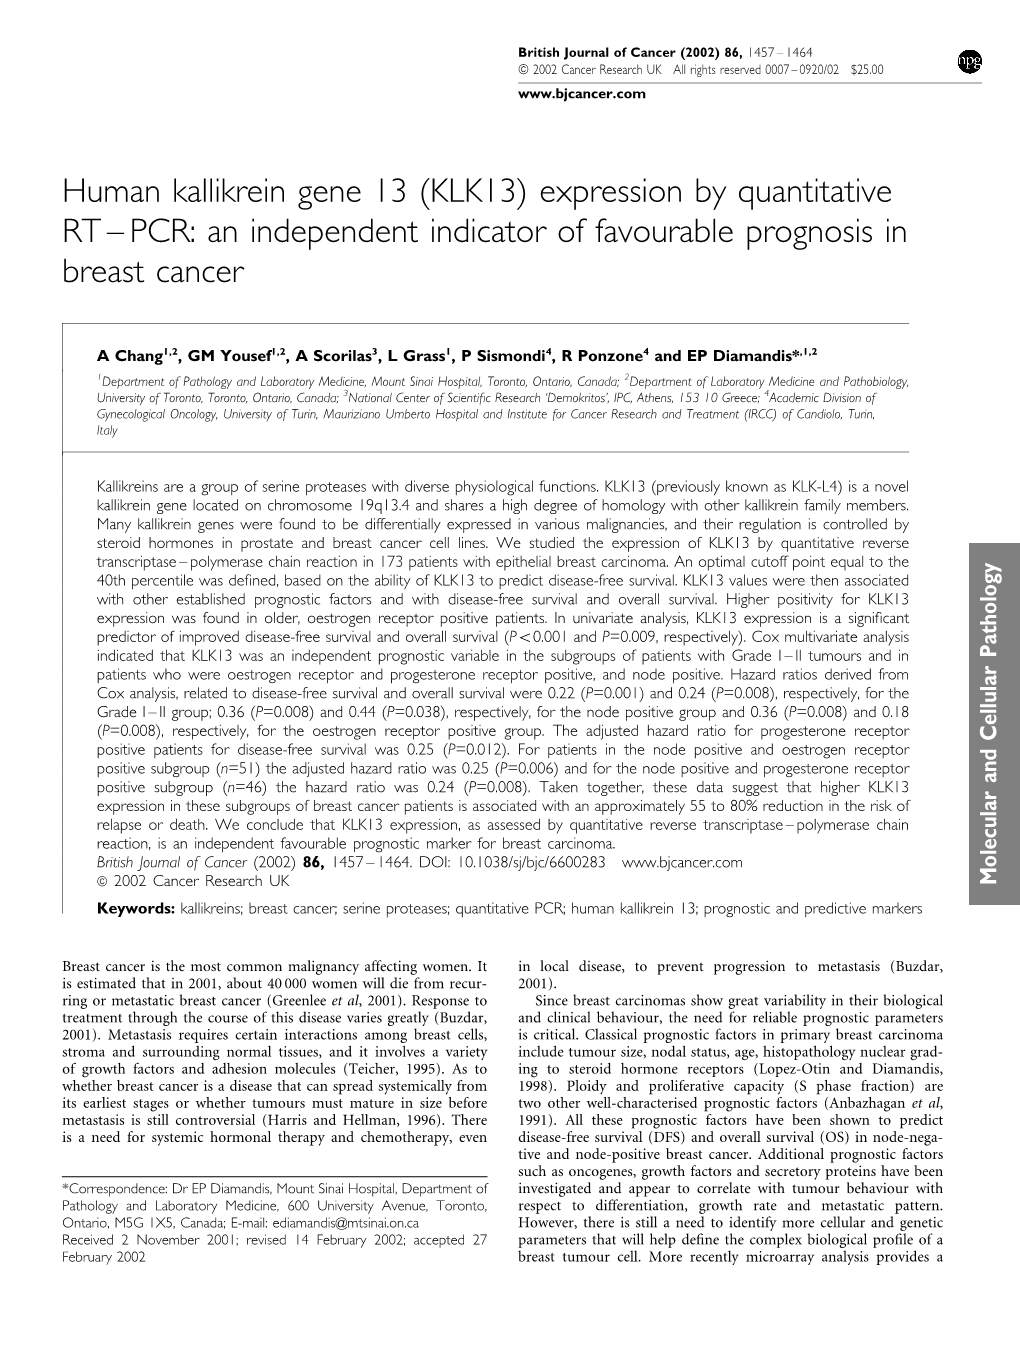 Human Kallikrein Gene 13 (KLK13) Expression by Quantitative RT – PCR: an Independent Indicator of Favourable Prognosis in Breast Cancer